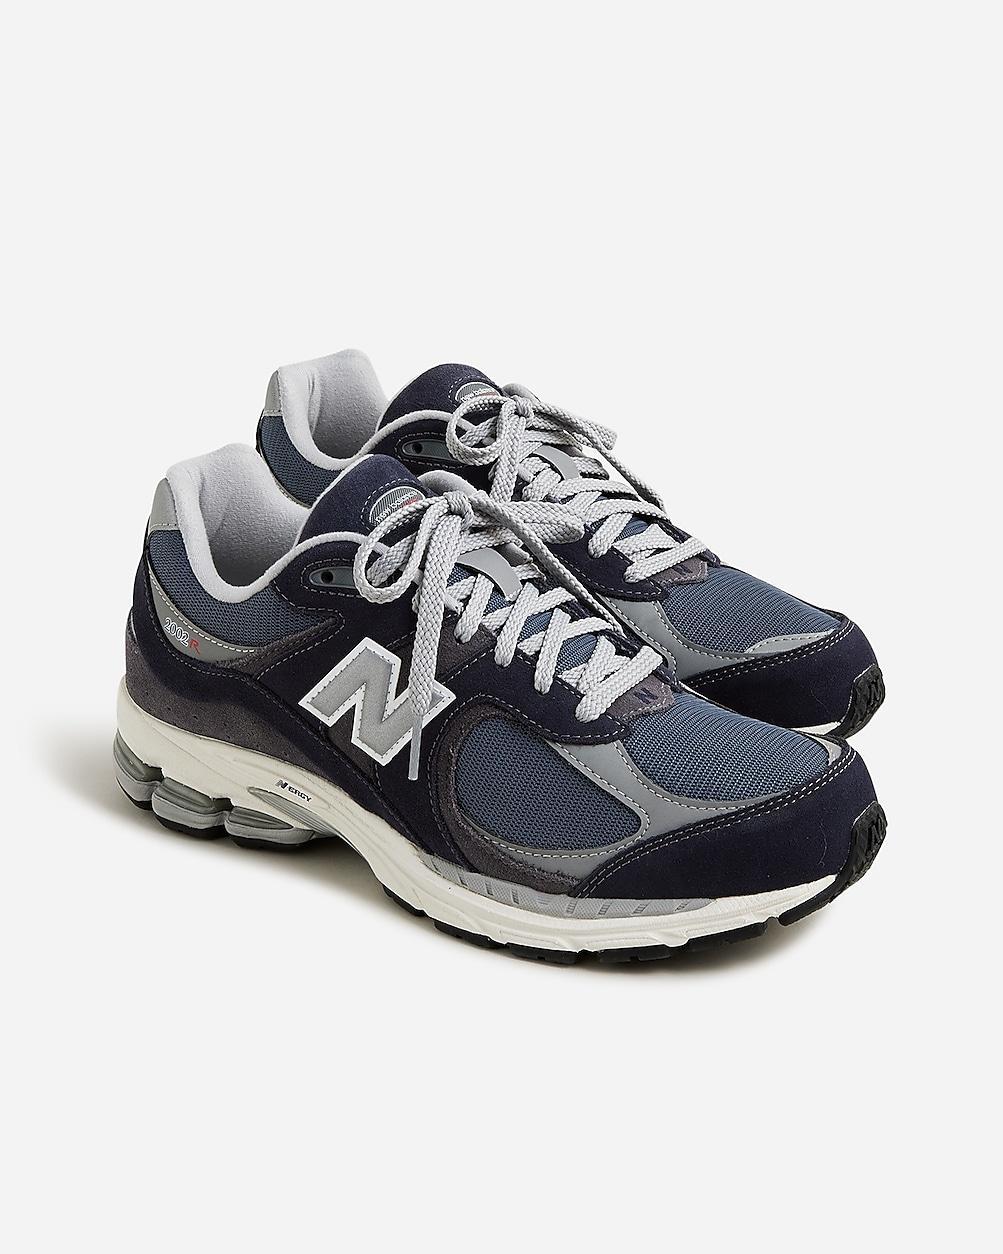 New Balance® 2002R sneakers Product Image